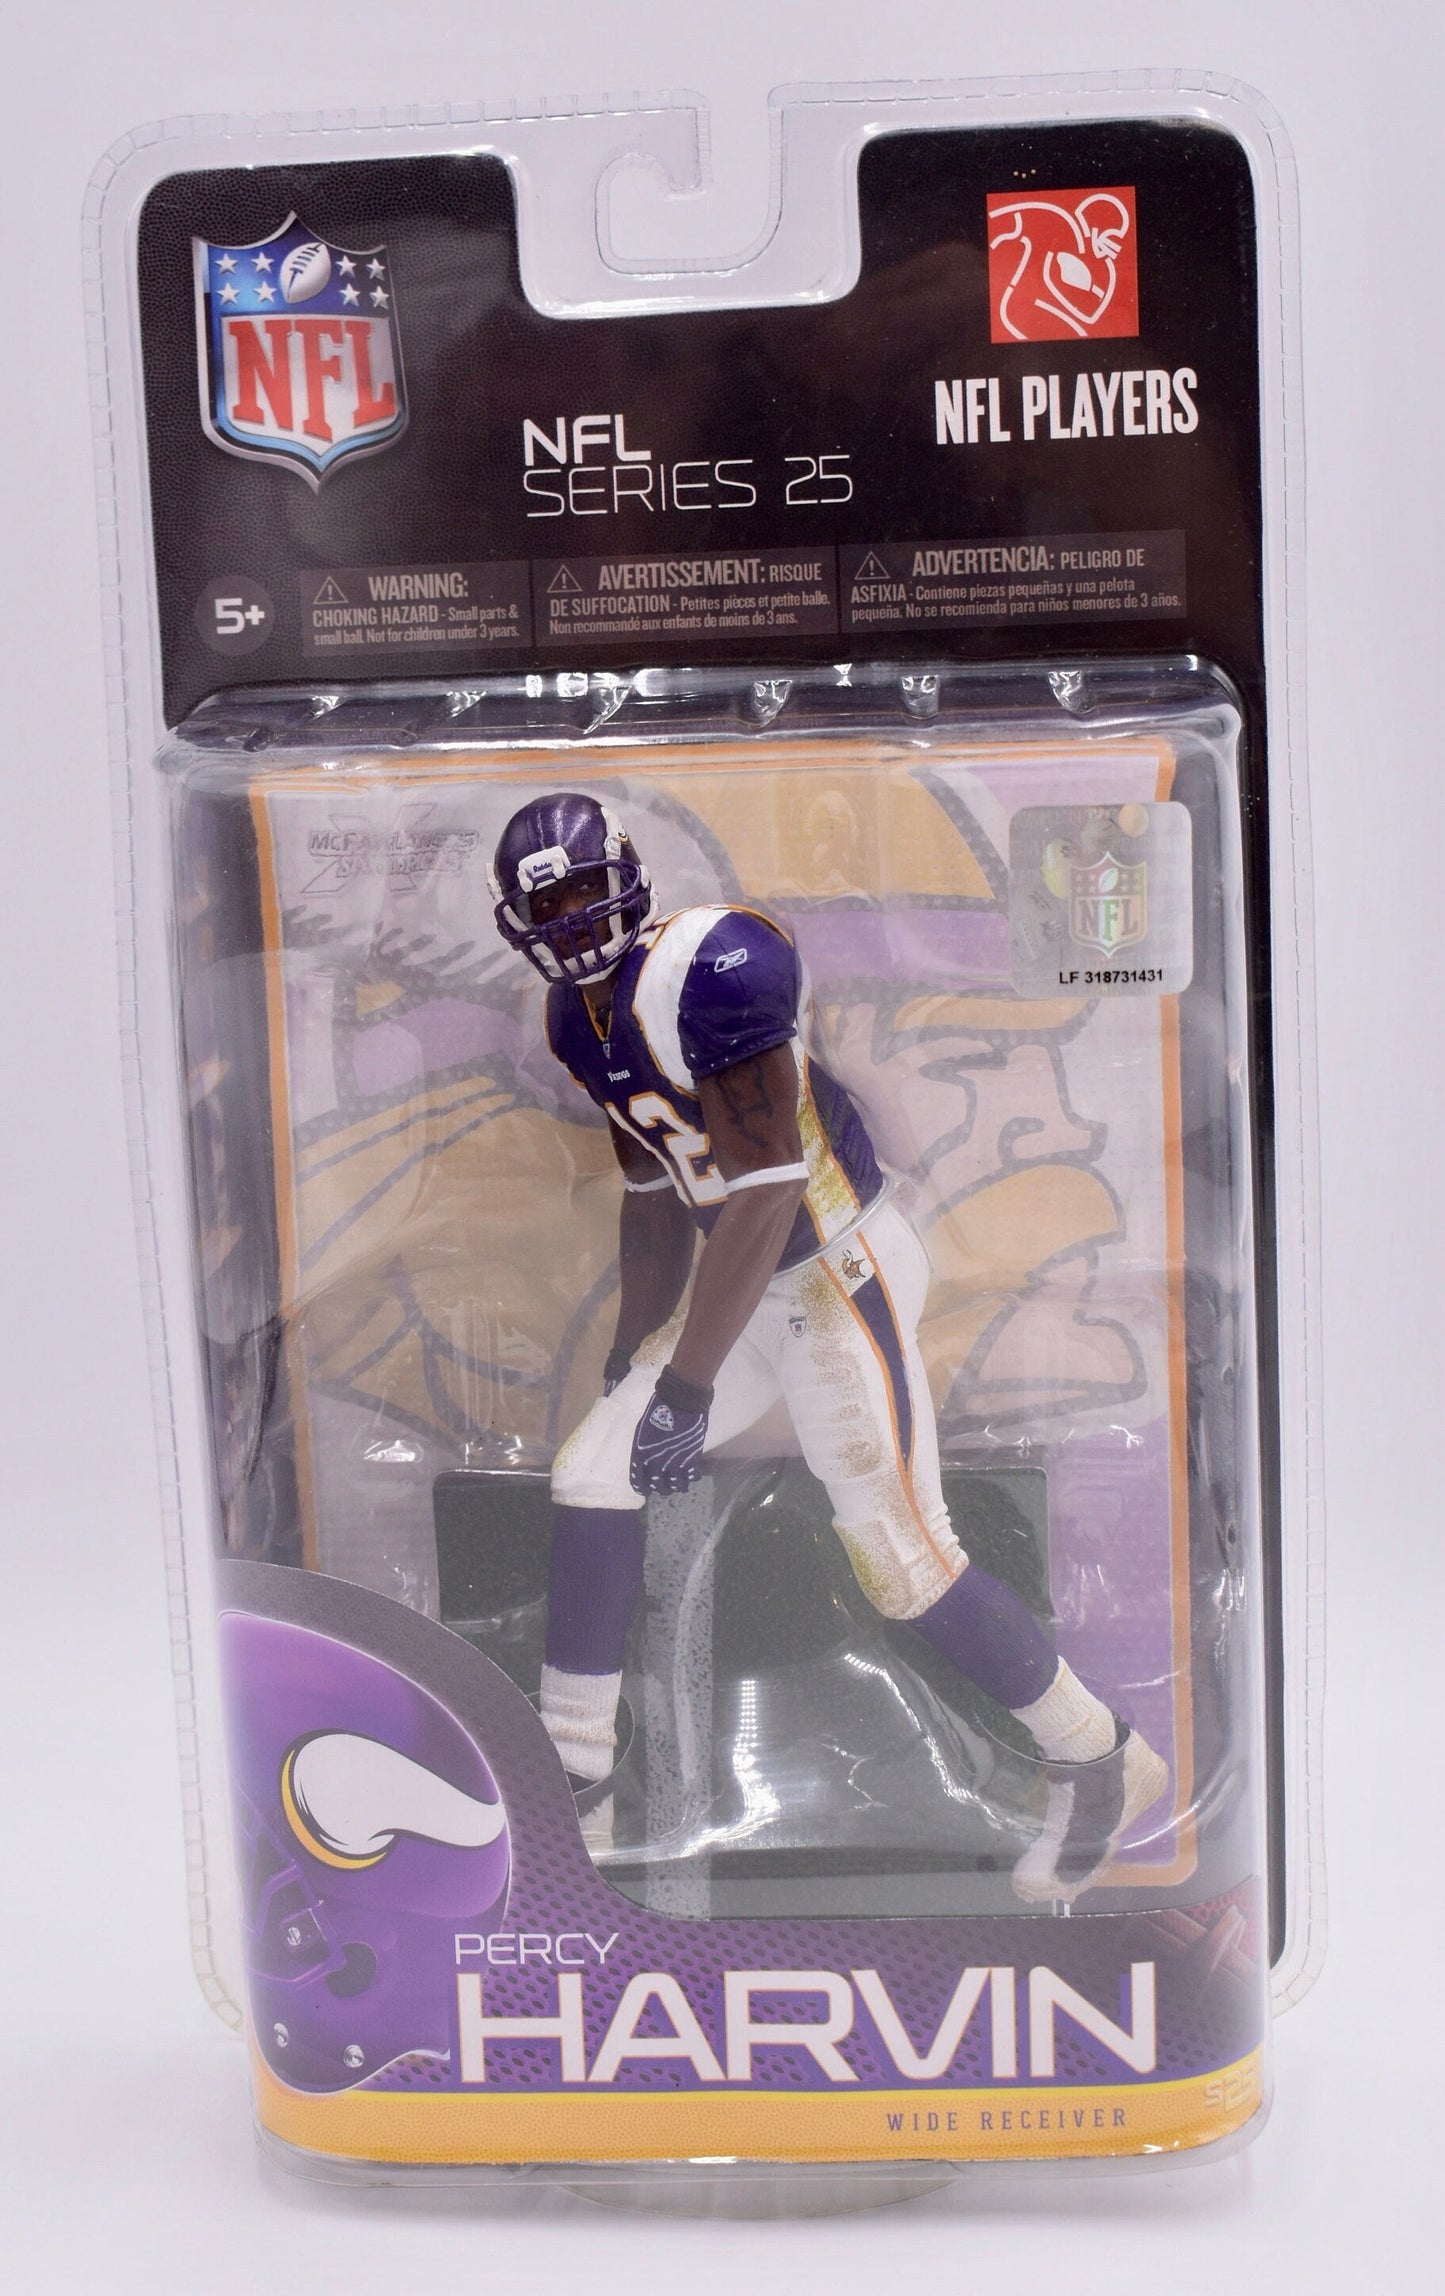 McFarlane Toys Percy Harvin Minnesota Vikings Purple Jersey NFL Series 25 Perfect Birthday Gift Collectable Model Toy Action Figure